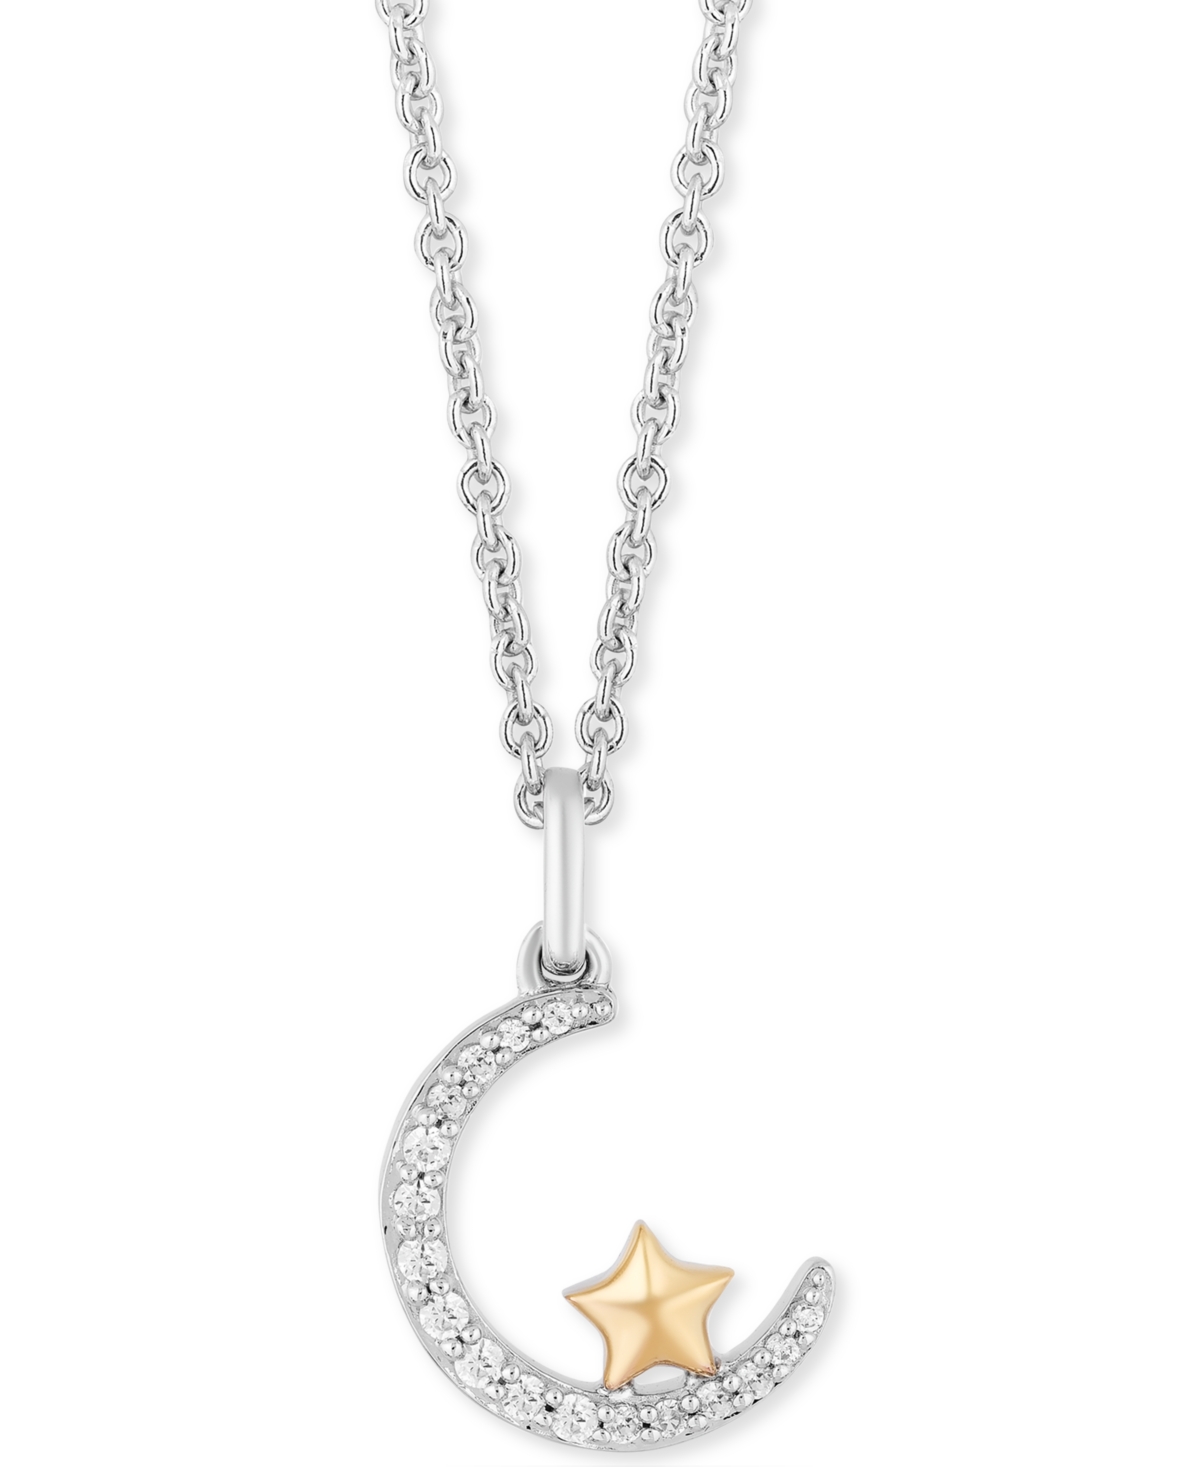 Enchanted Disney Diamond Crescent Moon & Star Jasmine Pendant Necklace (1/10 ct. t.w.) in Sterling Silver & 14k Gold, 16" + 2" extender - Silver